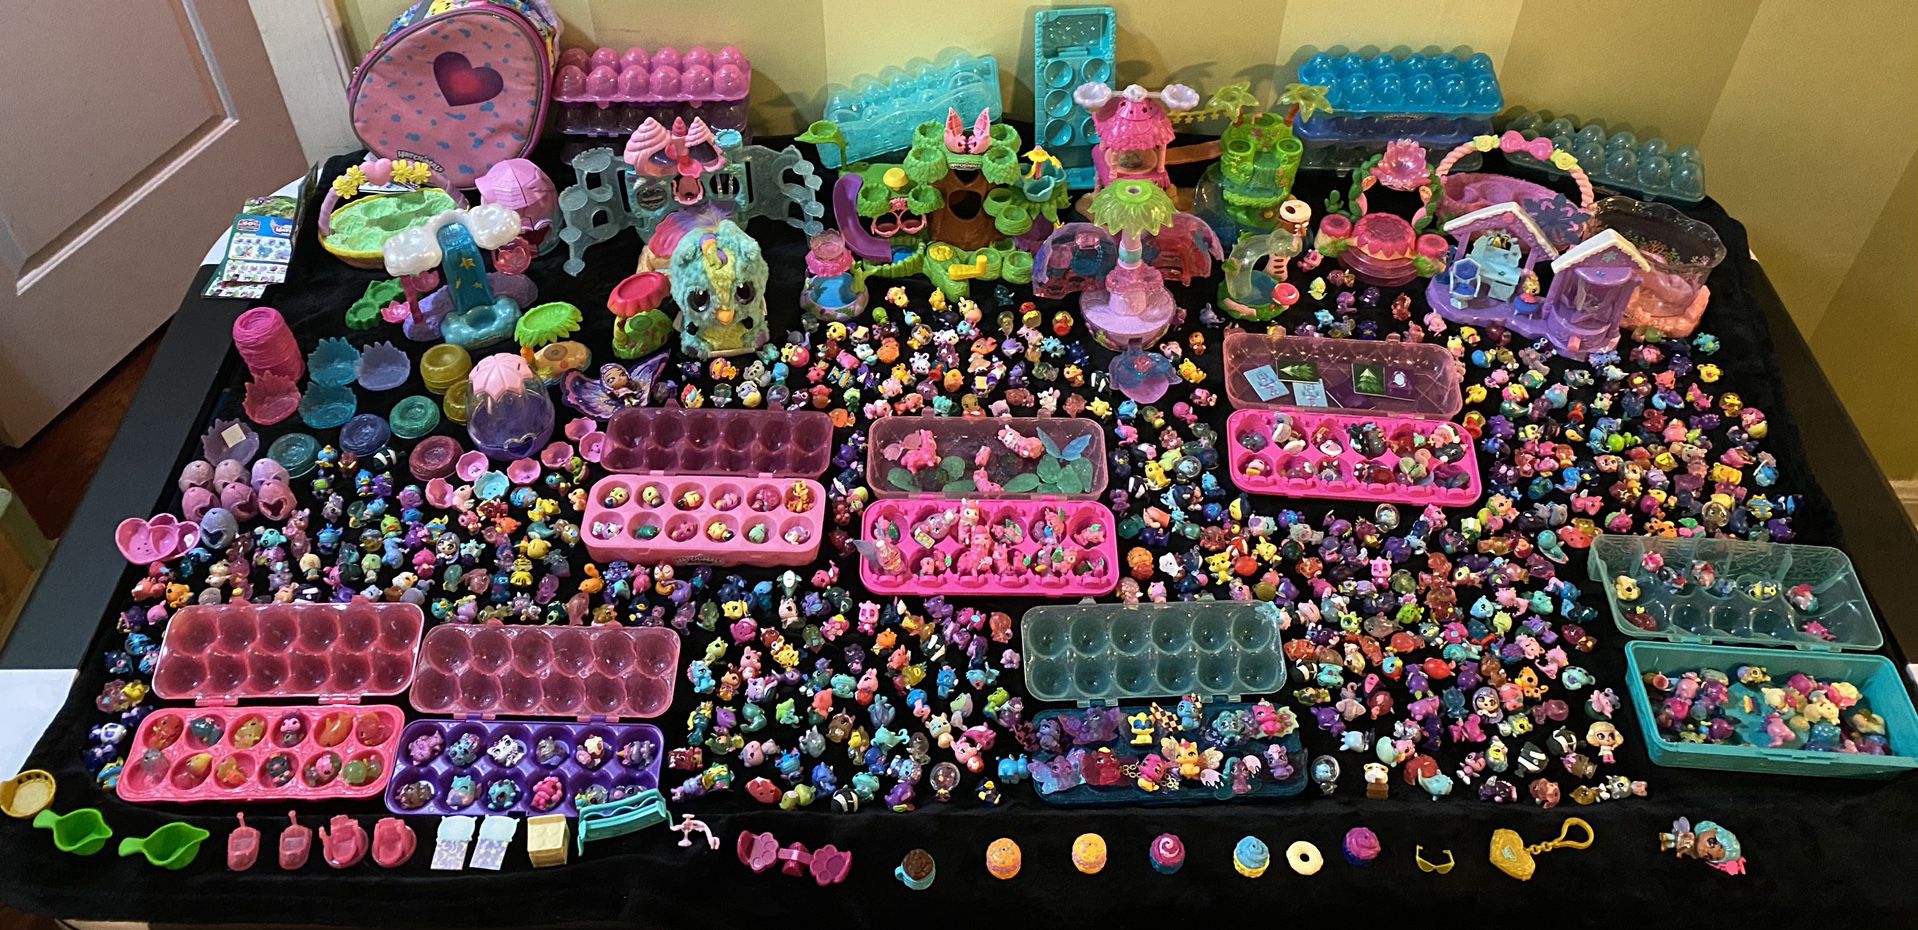 Hatchimals CollEGGtibles Lot 800+ pieces playsets/figures Seasons 1-11.5 (25 Pounds) Over $3k+ Value ! (Collectors Items) Kids Toy Figures